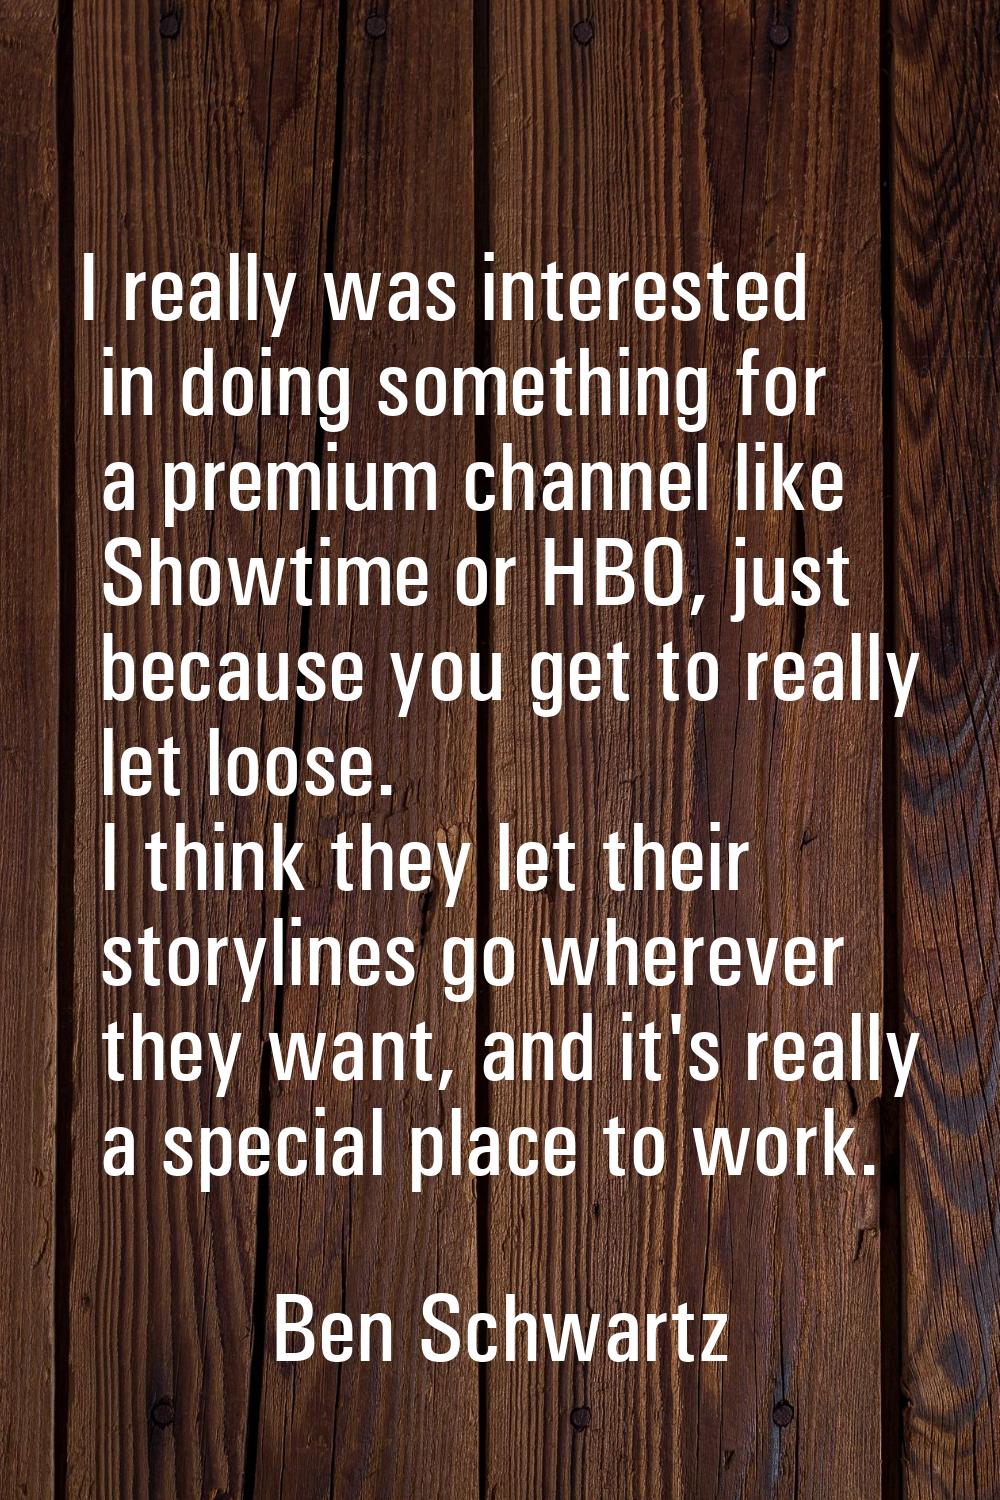 I really was interested in doing something for a premium channel like Showtime or HBO, just because